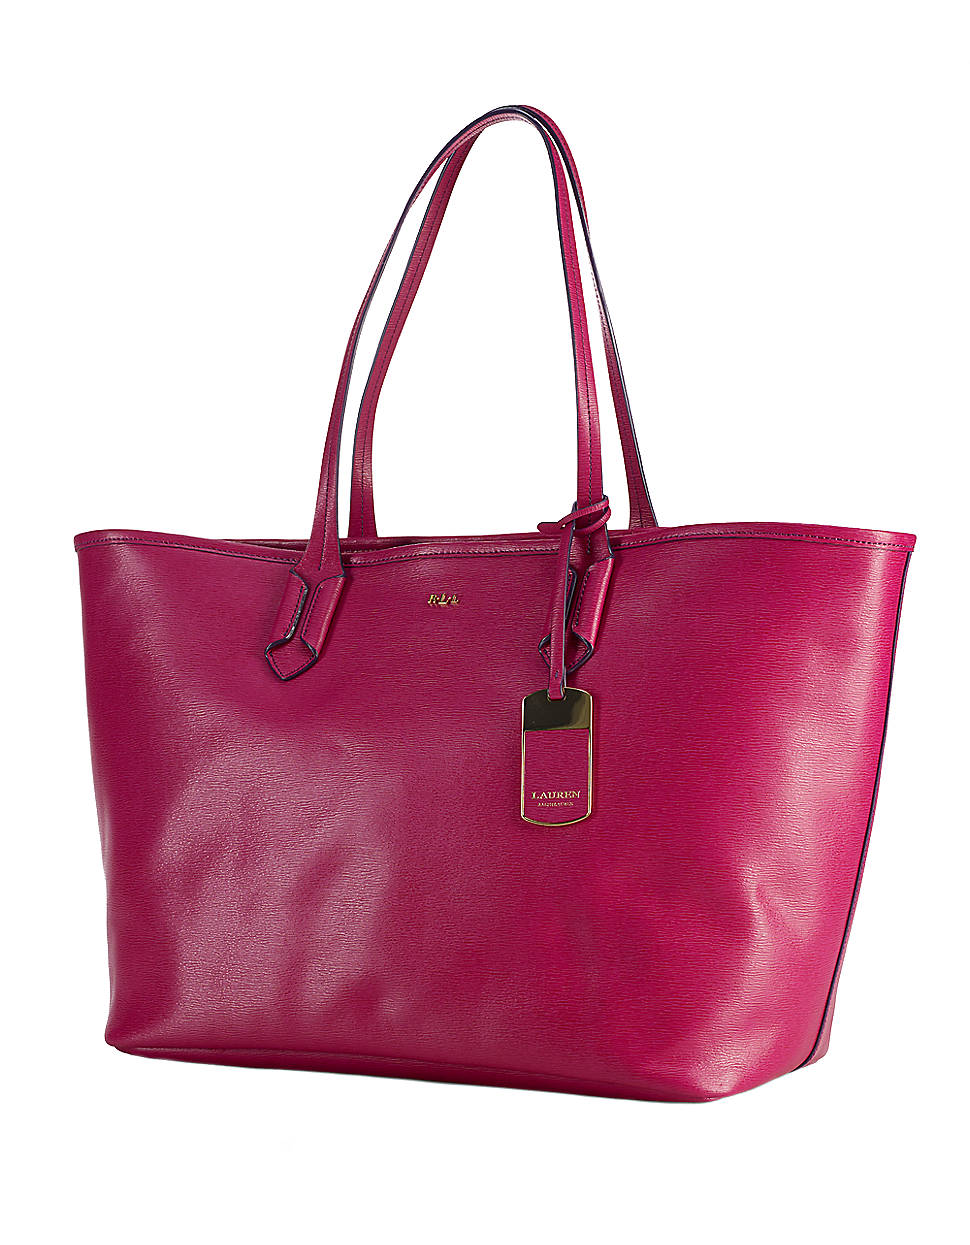 Lyst - Lauren By Ralph Lauren Tate Classic Leather Tote Bag in Pink